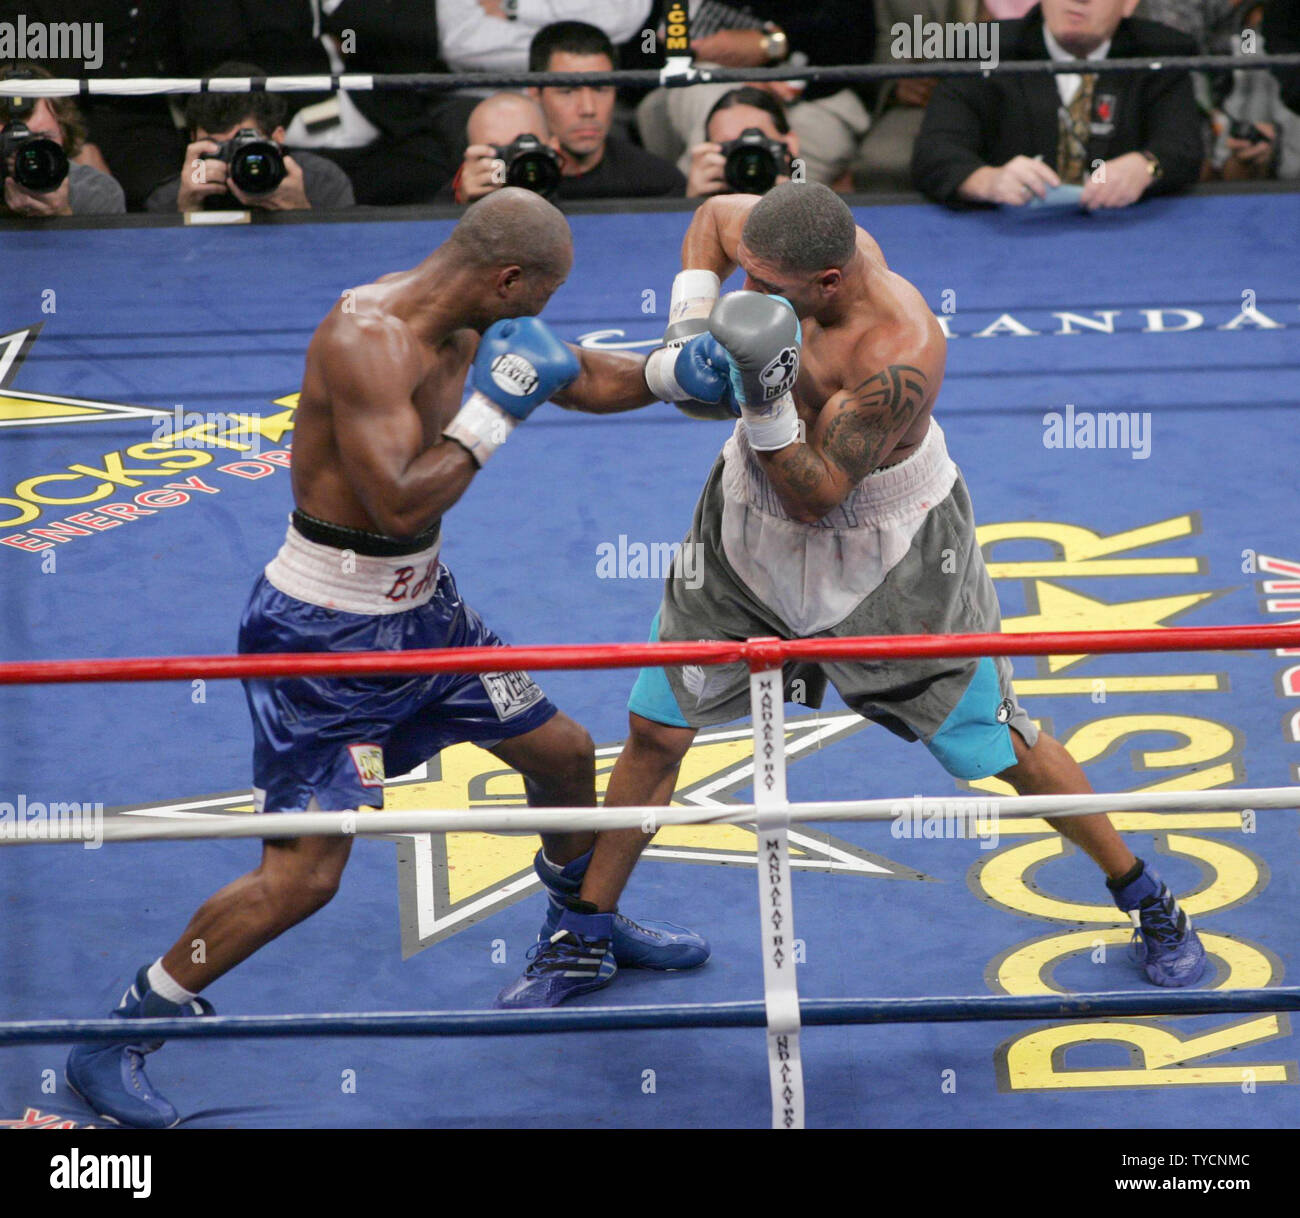 Champion Bernard Hopkins (L) hits challenger Winky Wright with a left during the Ring Magazine Light Heavyweight title fight at Mandalay Bay in Las Vegas on July 21, 2007. Hopkins won by decision.  (UPI Photo/Roger Williams) Stock Photo